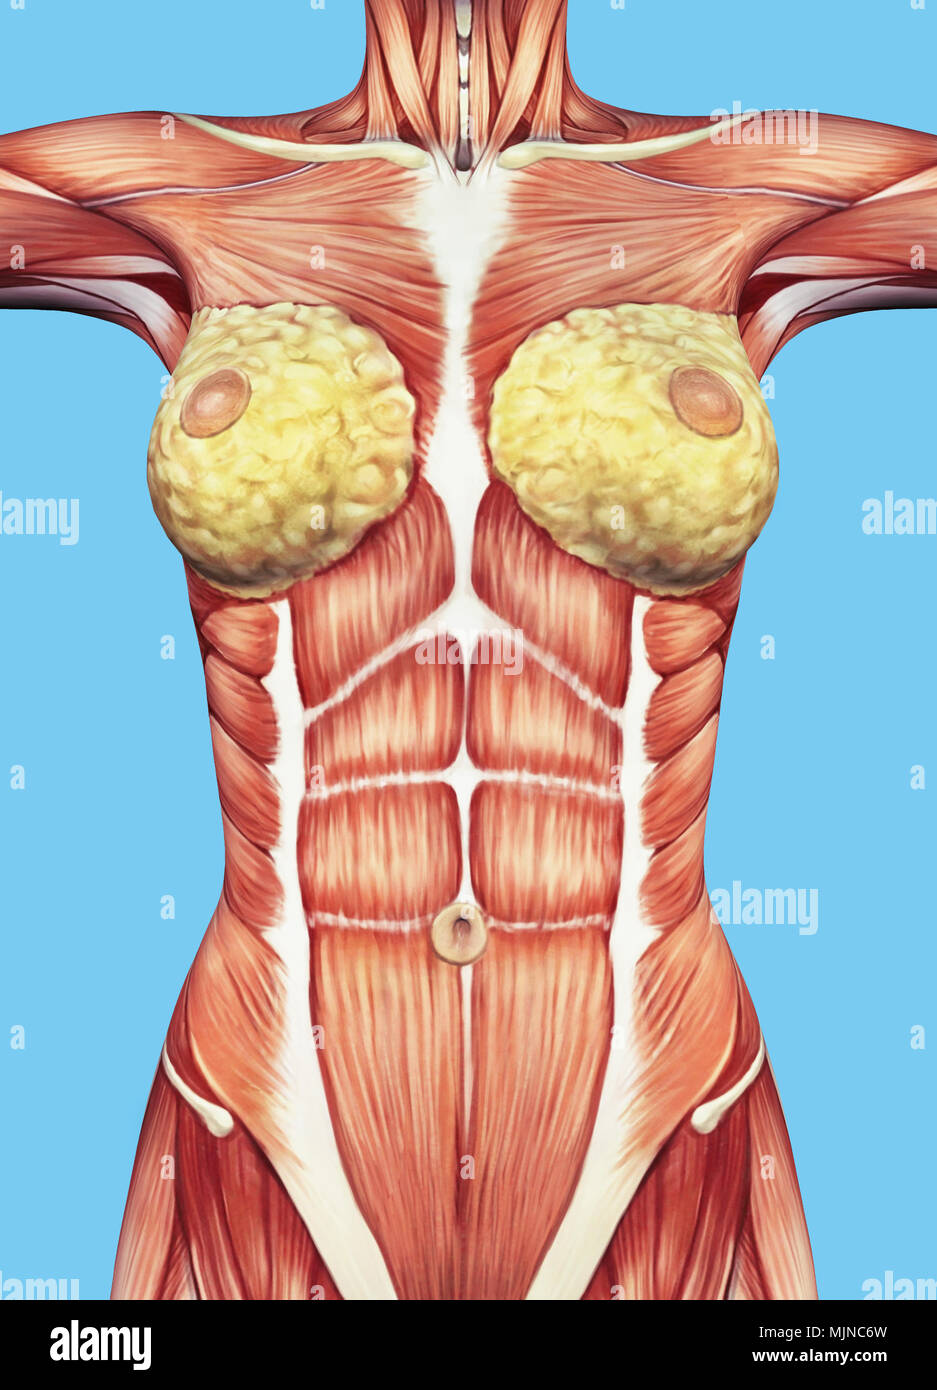 Anatomy of female chest and torso featuring major muscular groups and  glands Stock Photo - Alamy